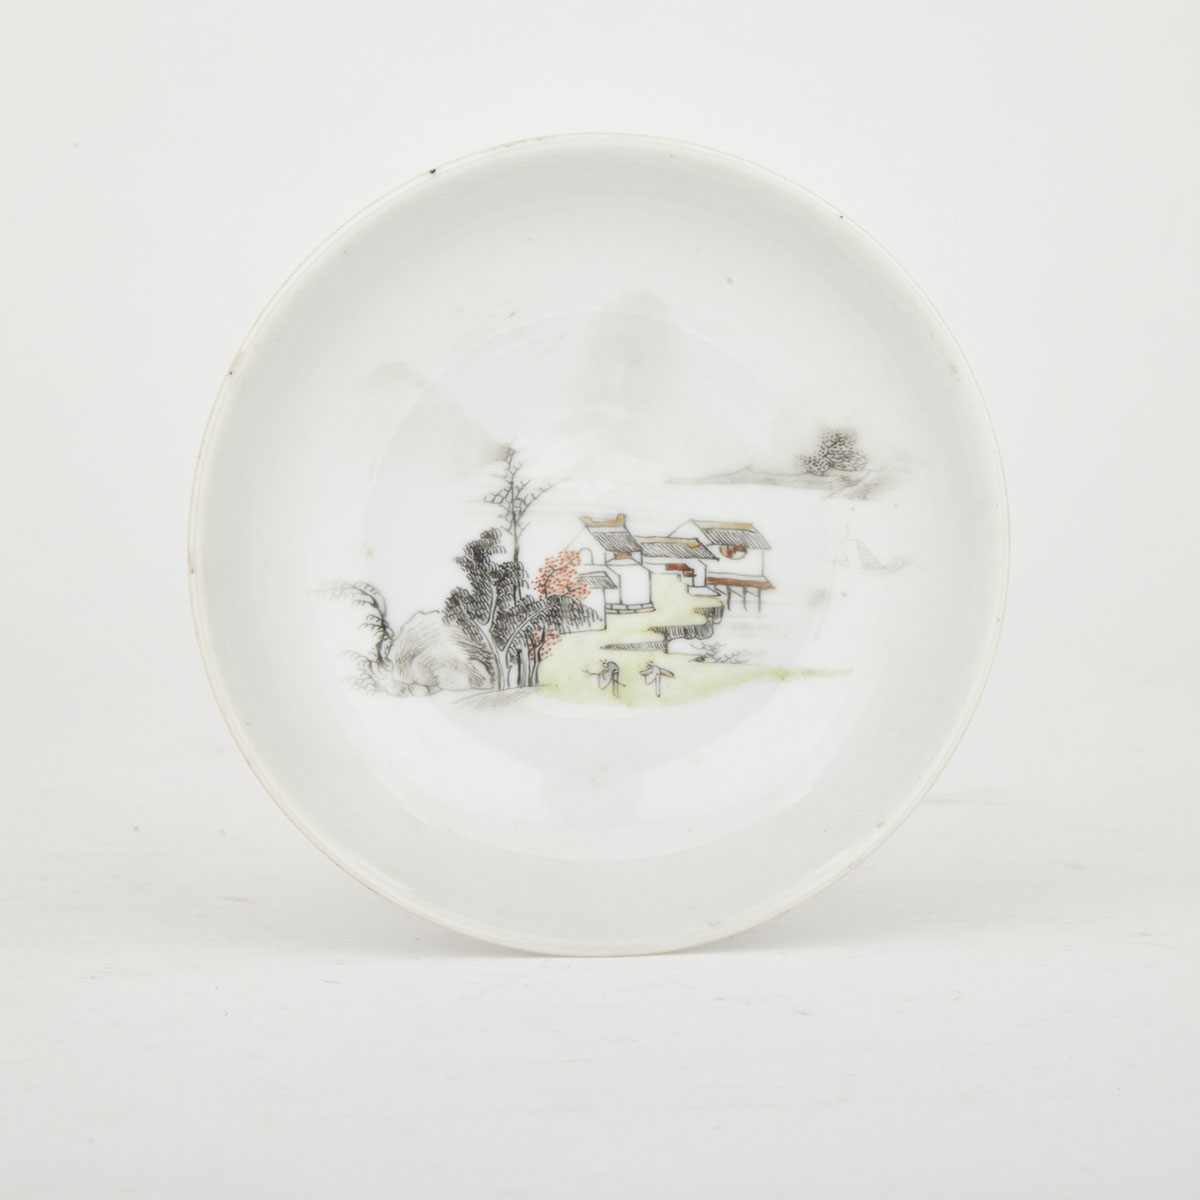 Chinese Export Small Dish, 19th Century or Earlier